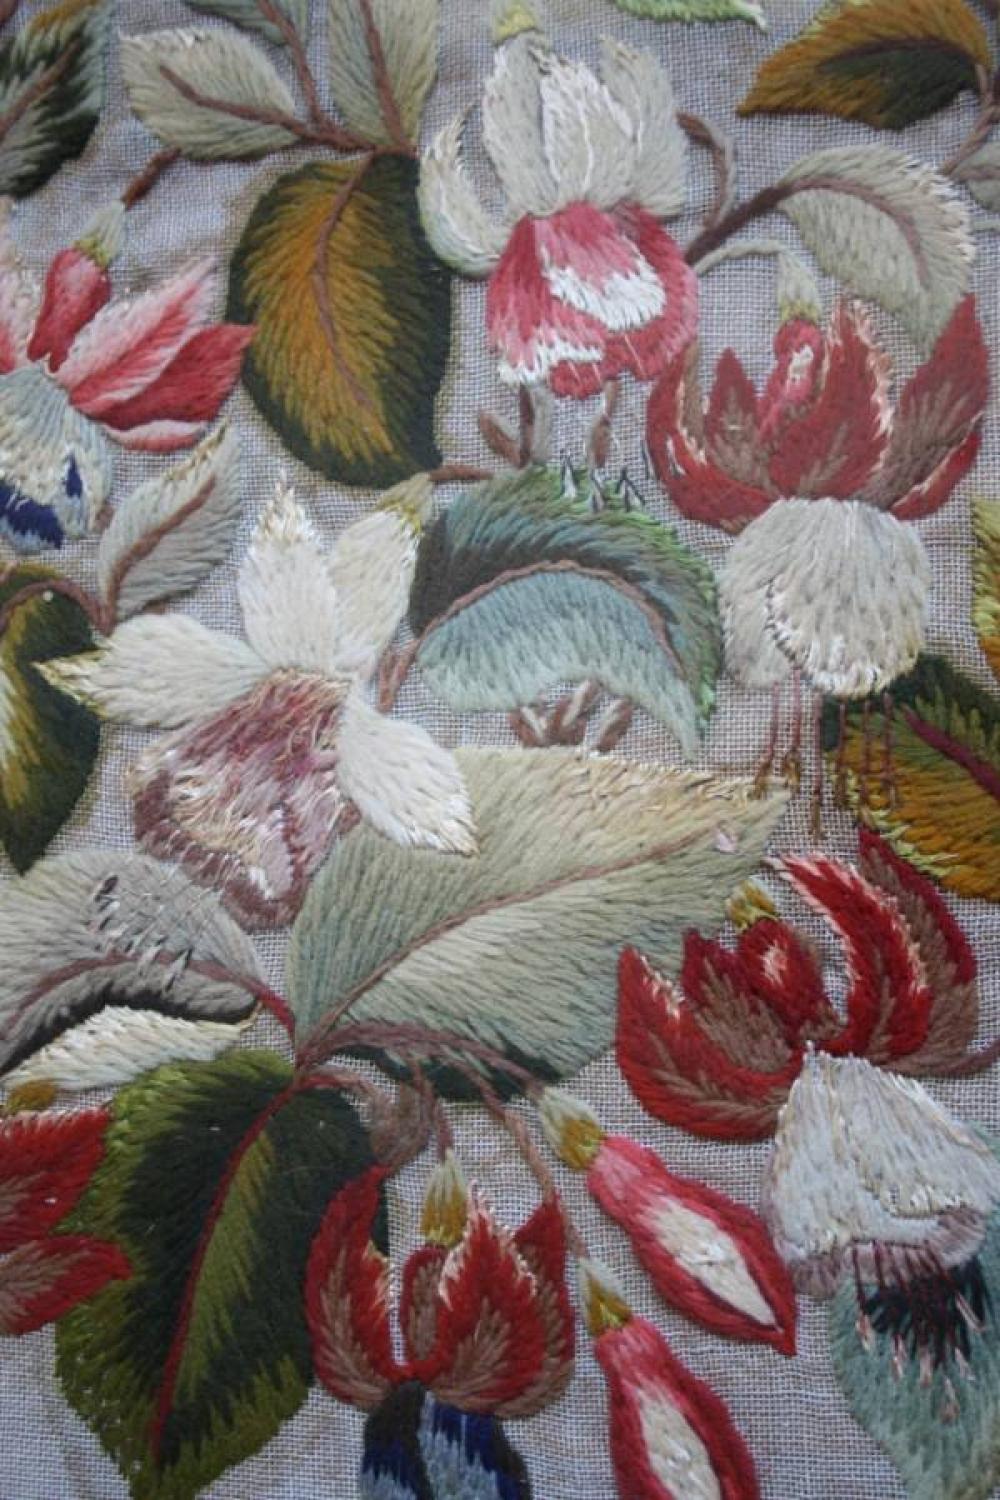 Floral embroidery - 19th Century